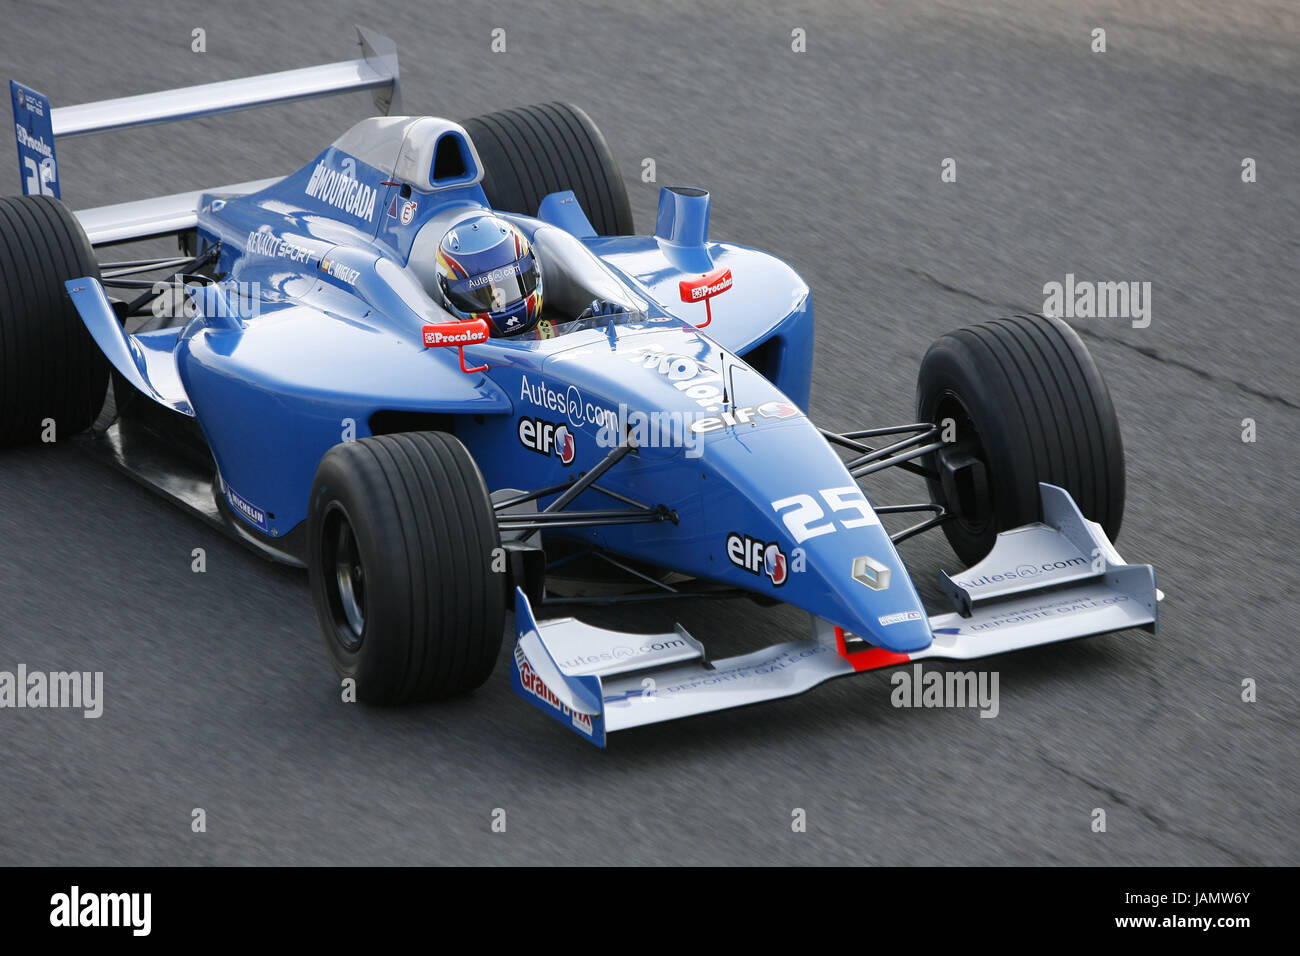 Formula Renault World Series,motor sport,Monza,Italy,racing car,blue,no property release,motor sport,speed,racing driver,racing car,race track,car,motor sport,sport,racing sport,sport,car racing,motion,speed, Stock Photo